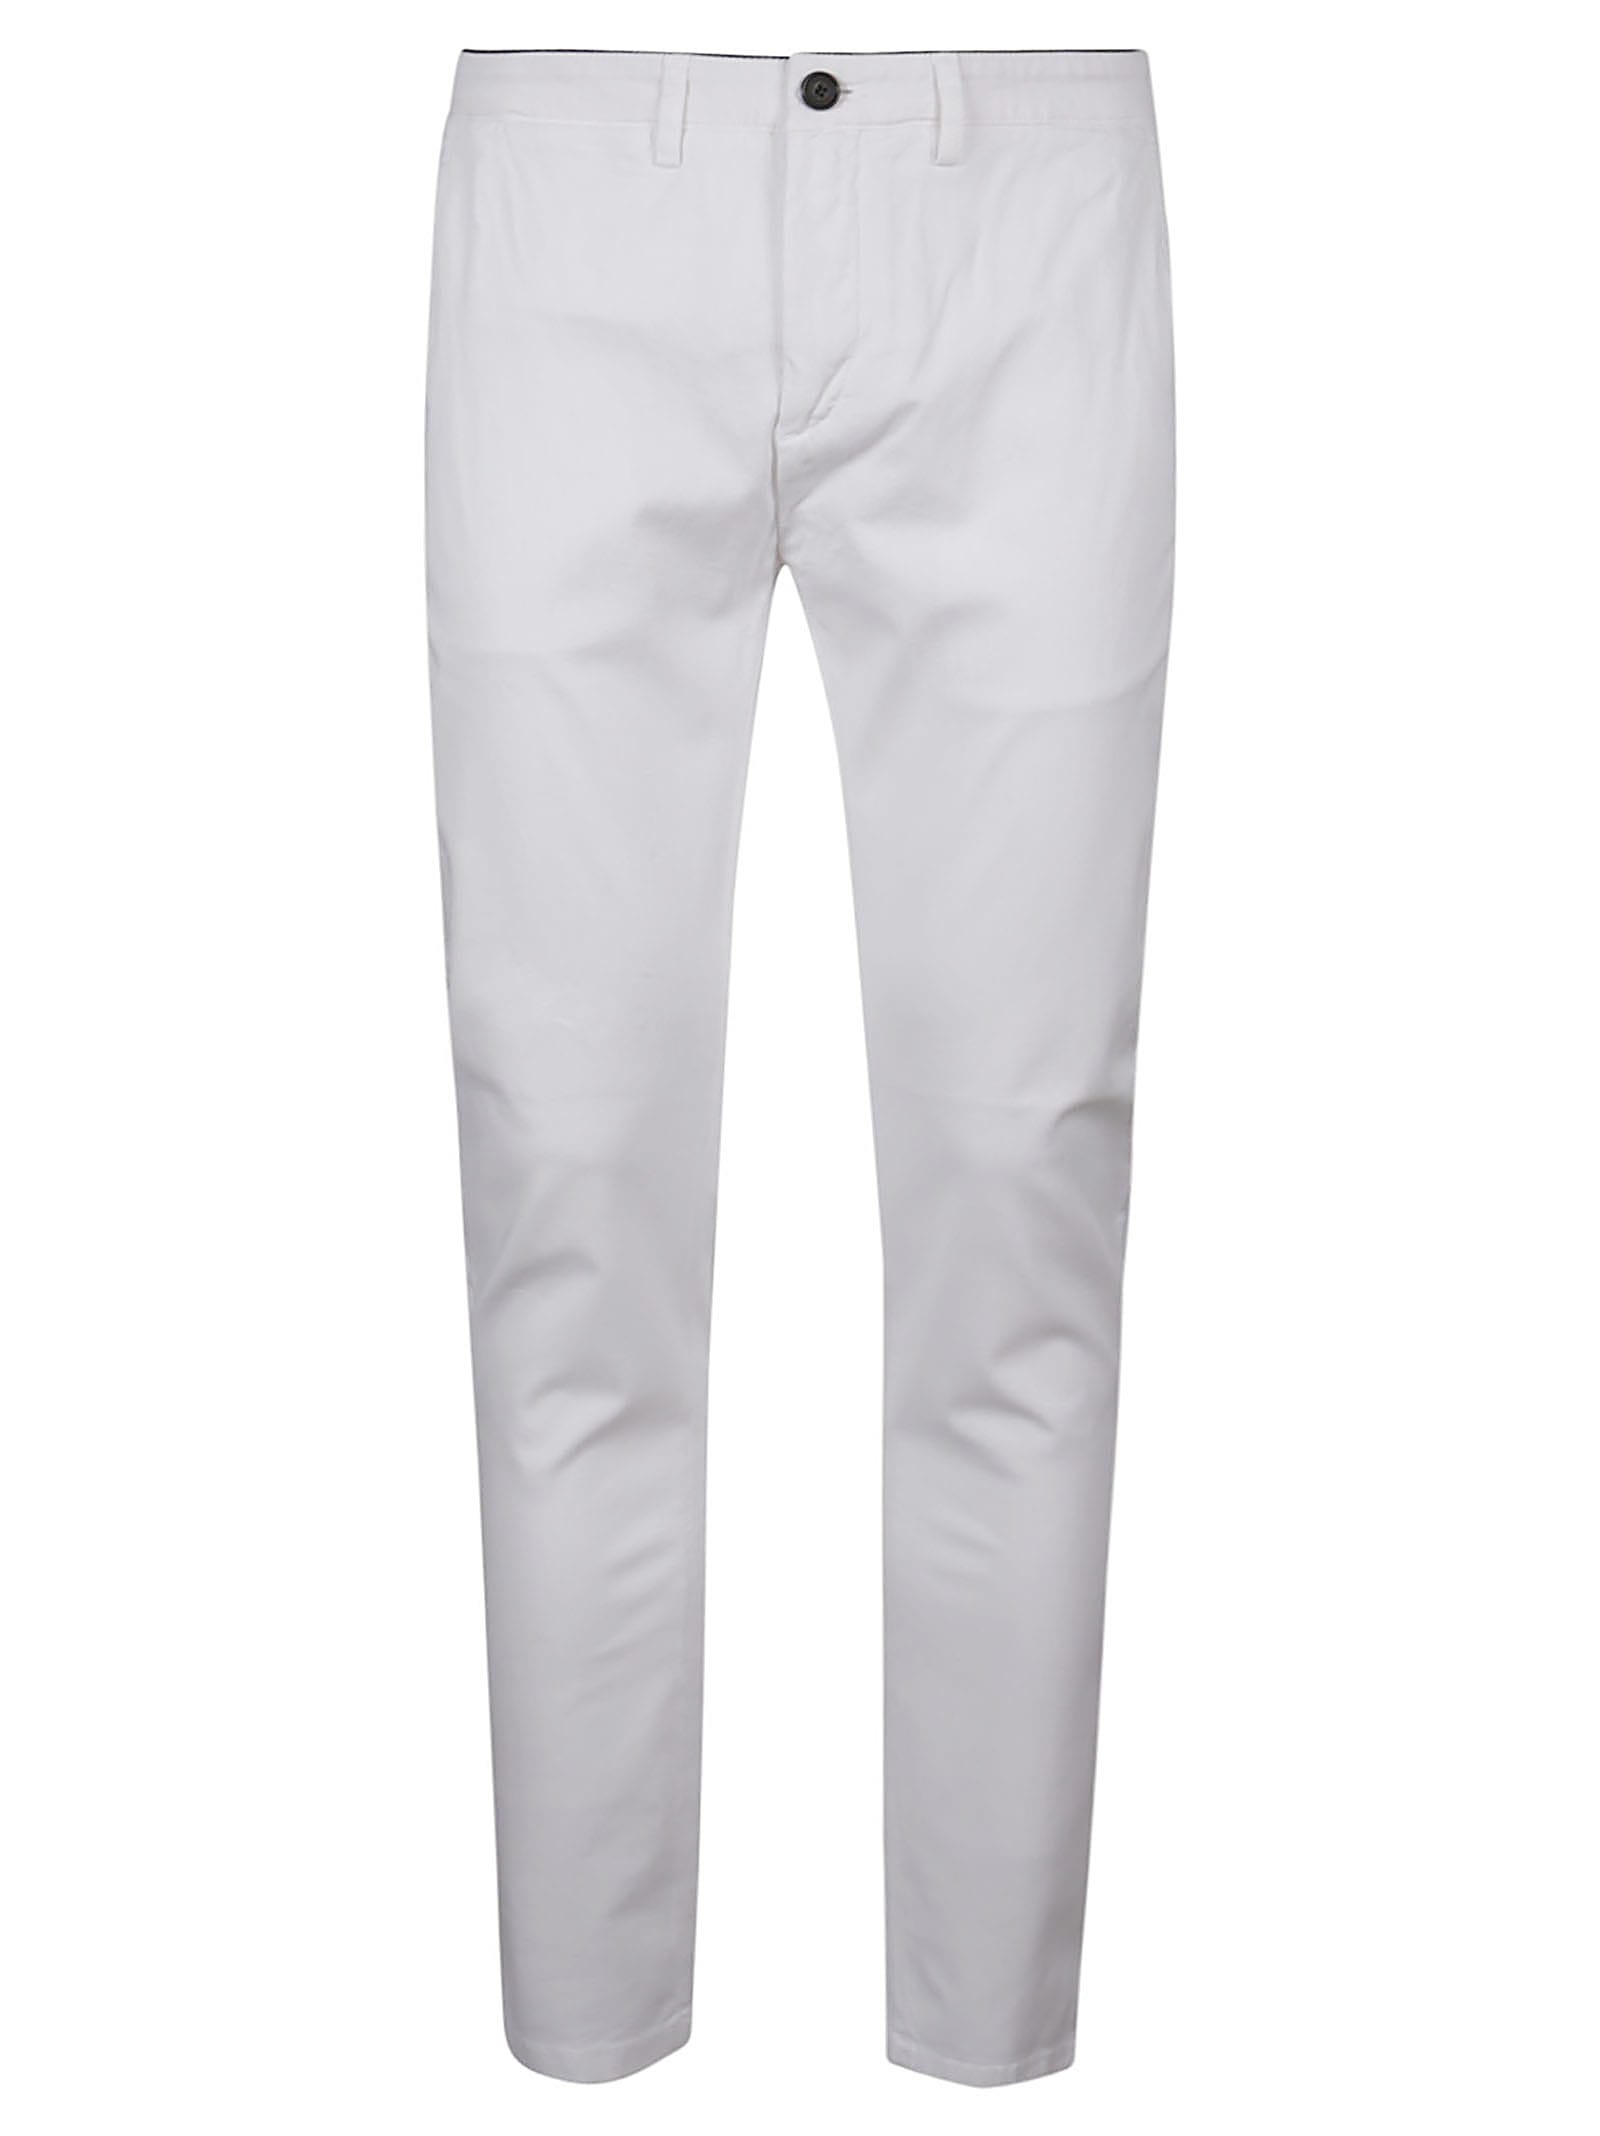 Shop Department Five Mike Chinos Superslim Pant In Bianco Ottico